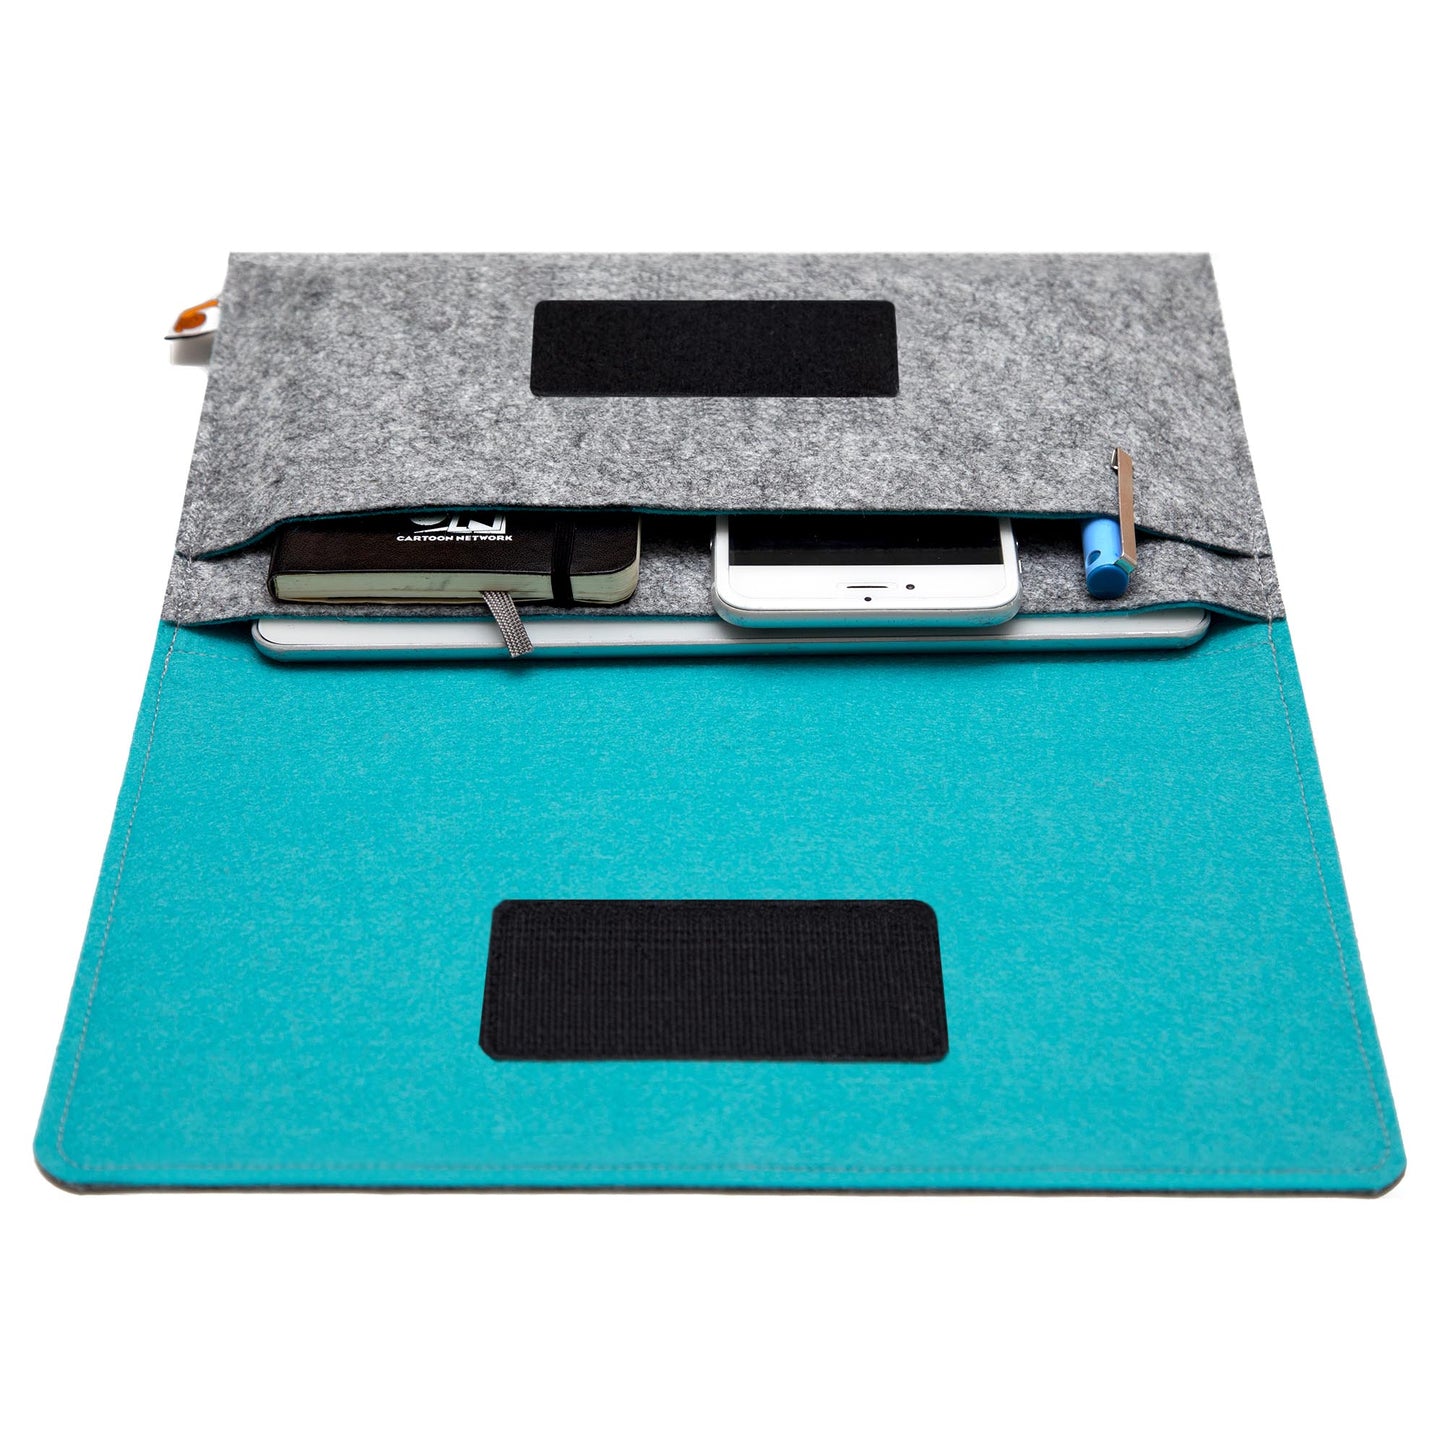 Premium Felt iPad Cover: Ultimate Protection with Accessories Pocket - Grey & Turquoise